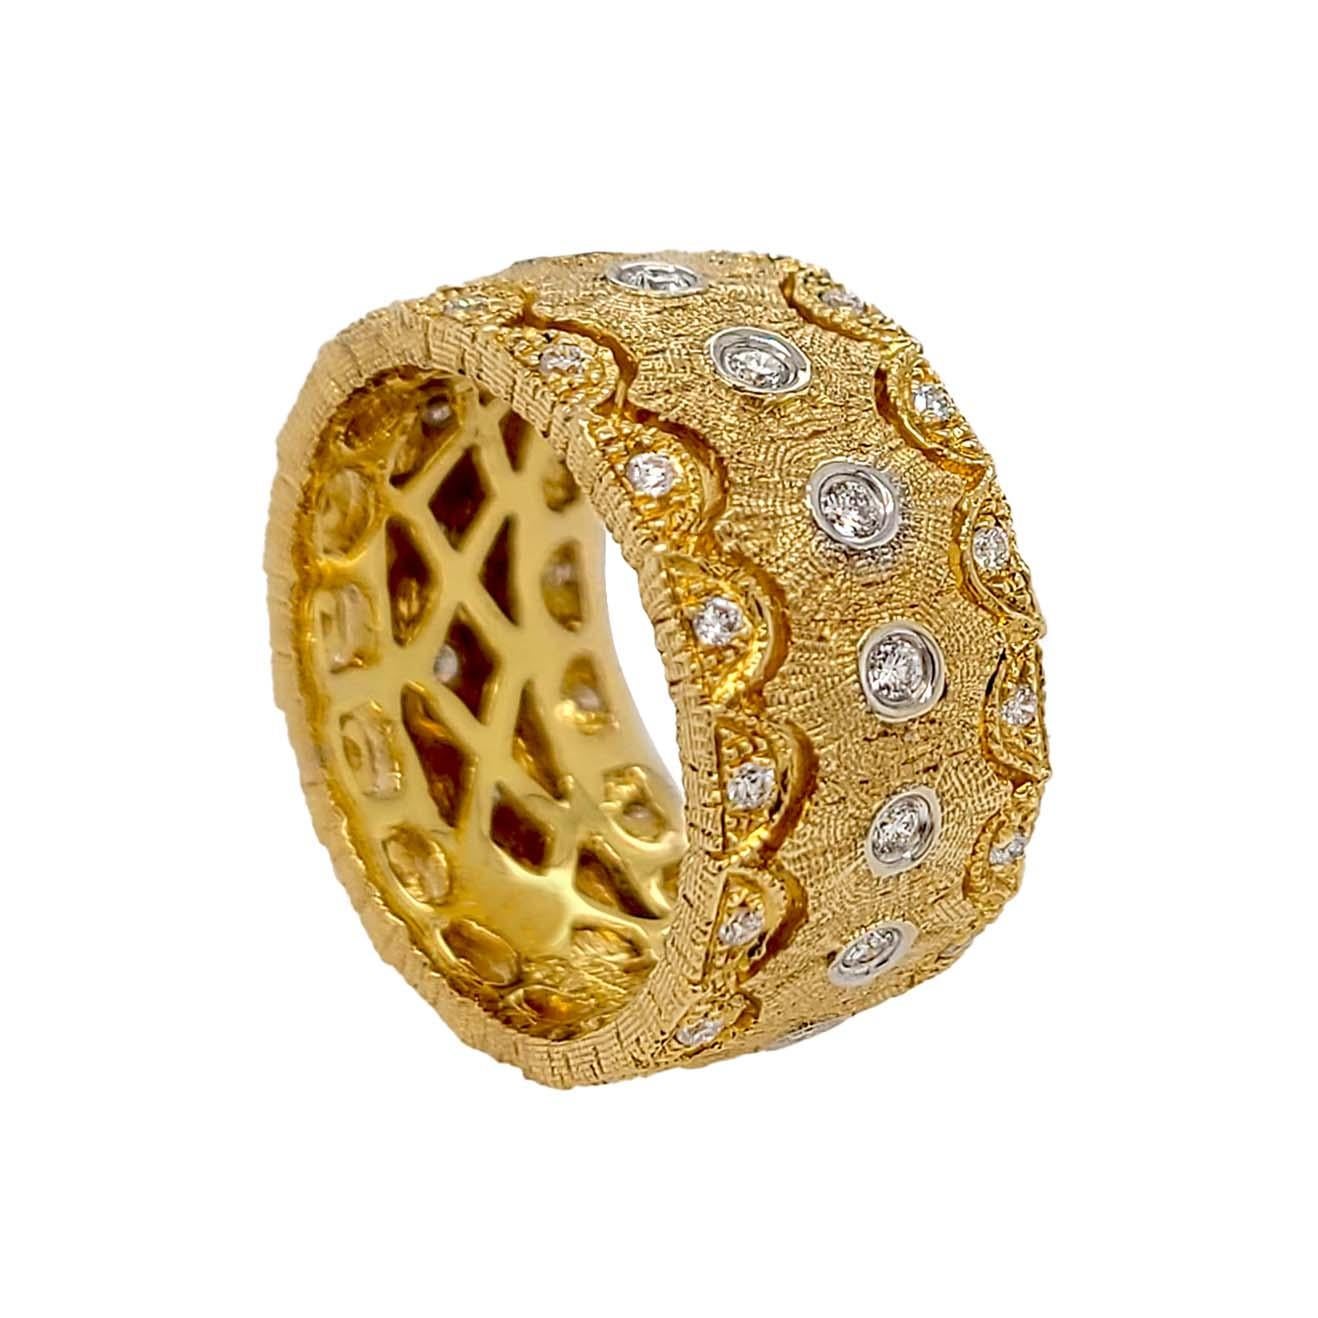 Produced by award winning Italian designer Stefano Vitolo. Stefano creates custom artisanal one of a kind jewelry with excellent gemstones in a truly old world Italian craftmanship.
This handcrafted ring has 0.42 total carat weight of F/G color and